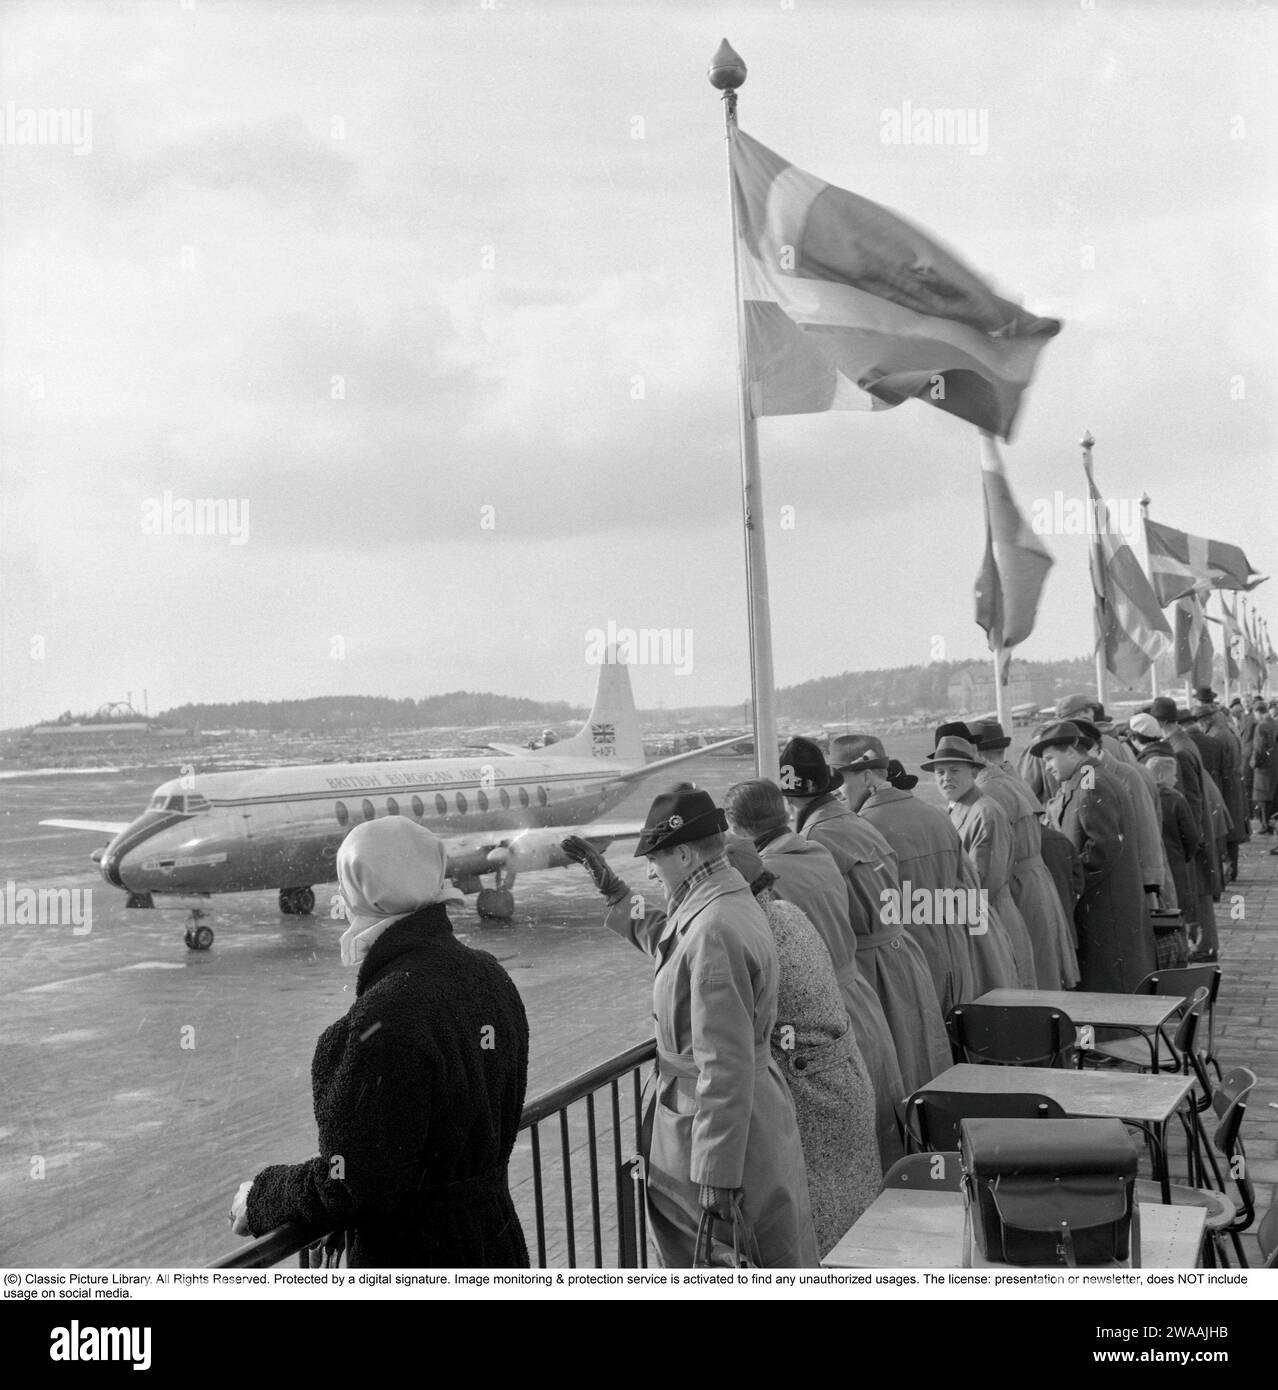 1950s airport. People are standing on an outdoor terrace overviewing the aircrafts waving goodbye to someone. Sweden 1956 Stock Photo